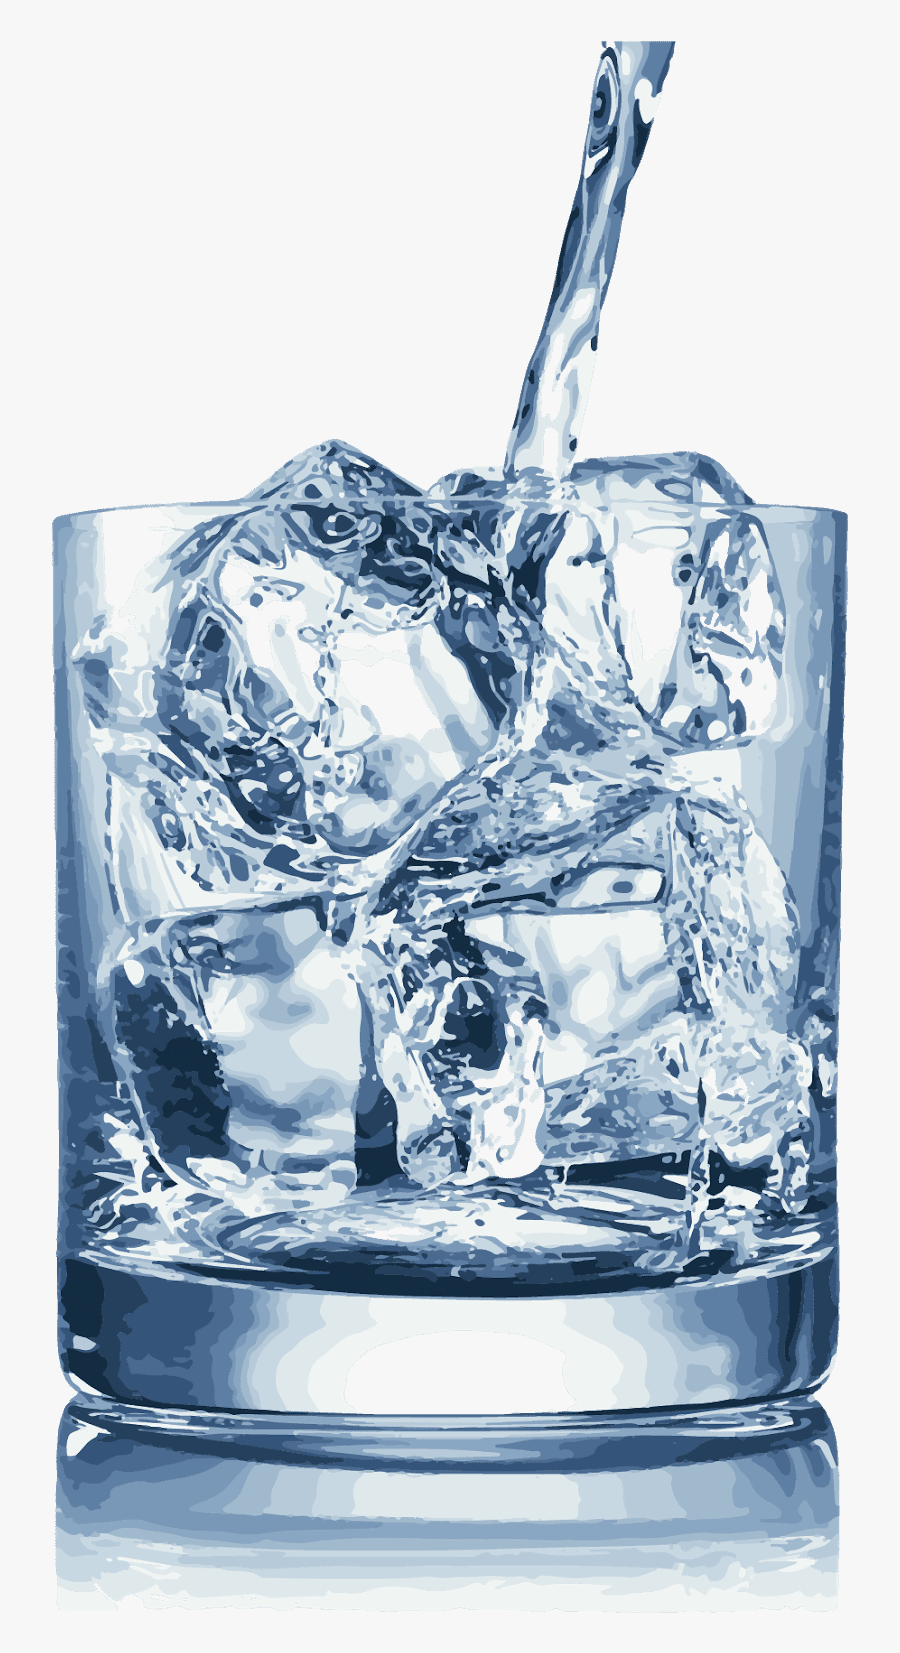 Ice Cup Clipart, Transparent Clipart